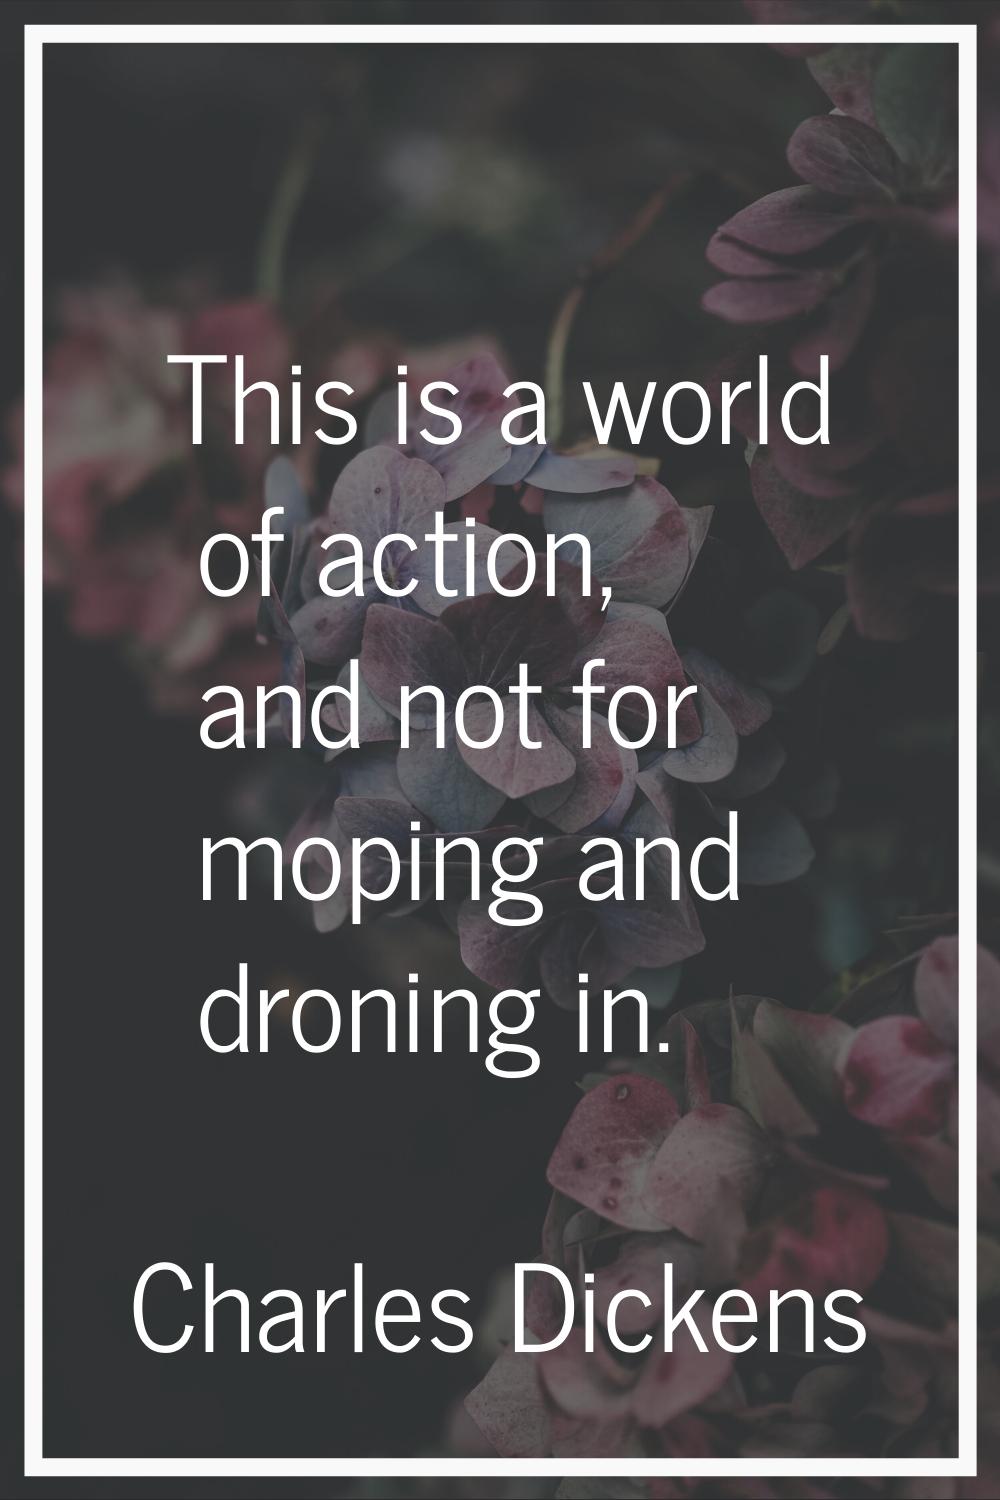 This is a world of action, and not for moping and droning in.